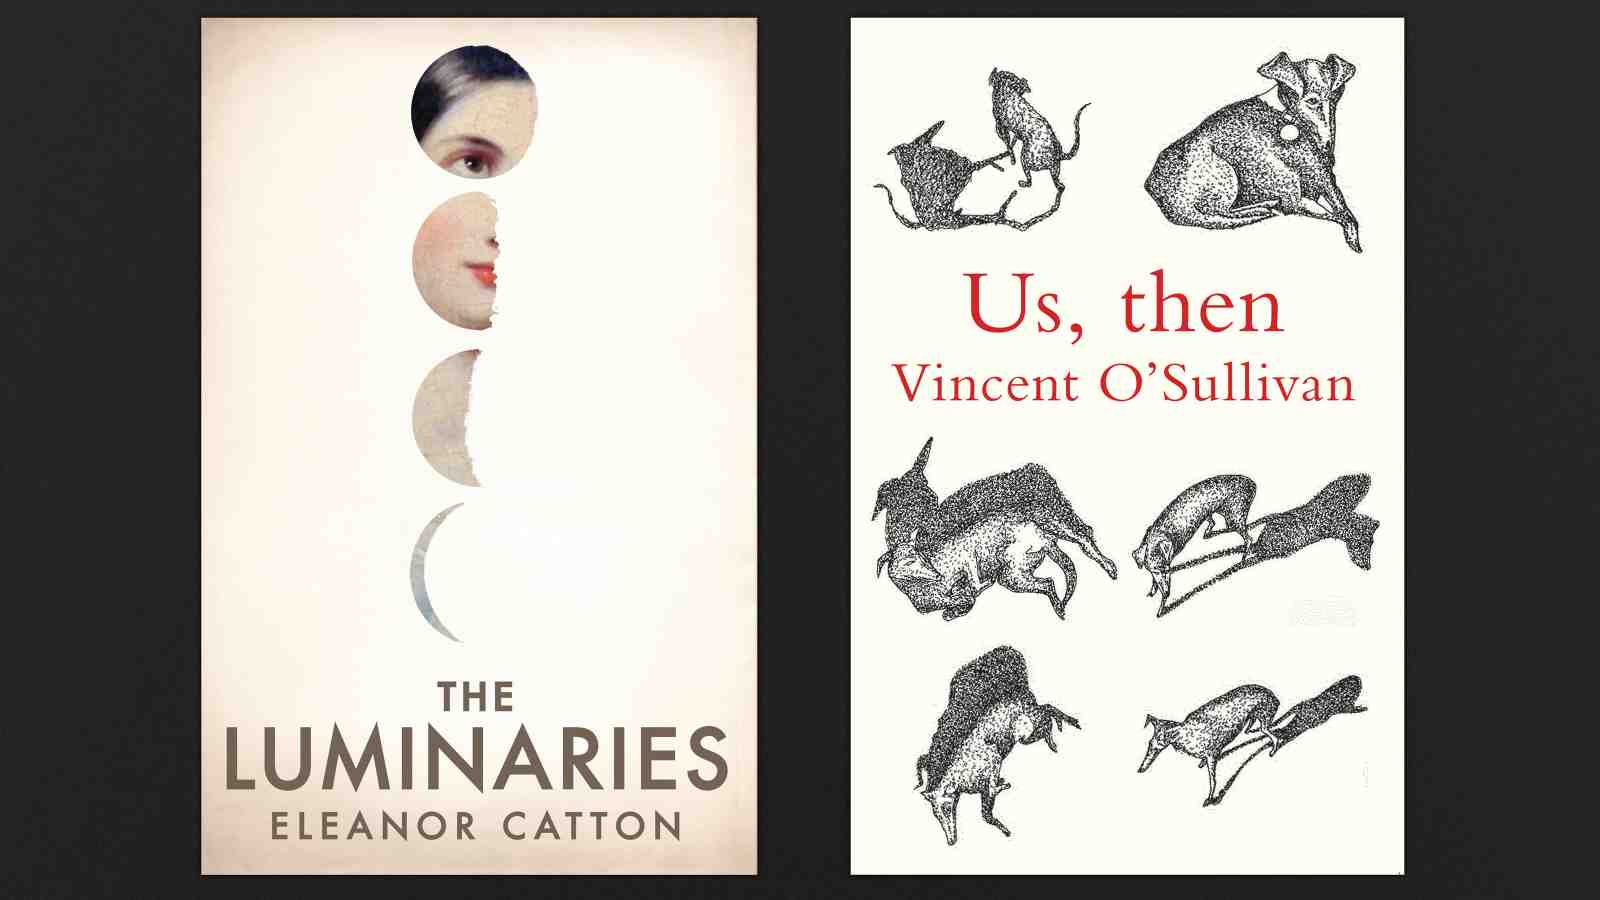 Book covers of The Luminaries and Us, then.